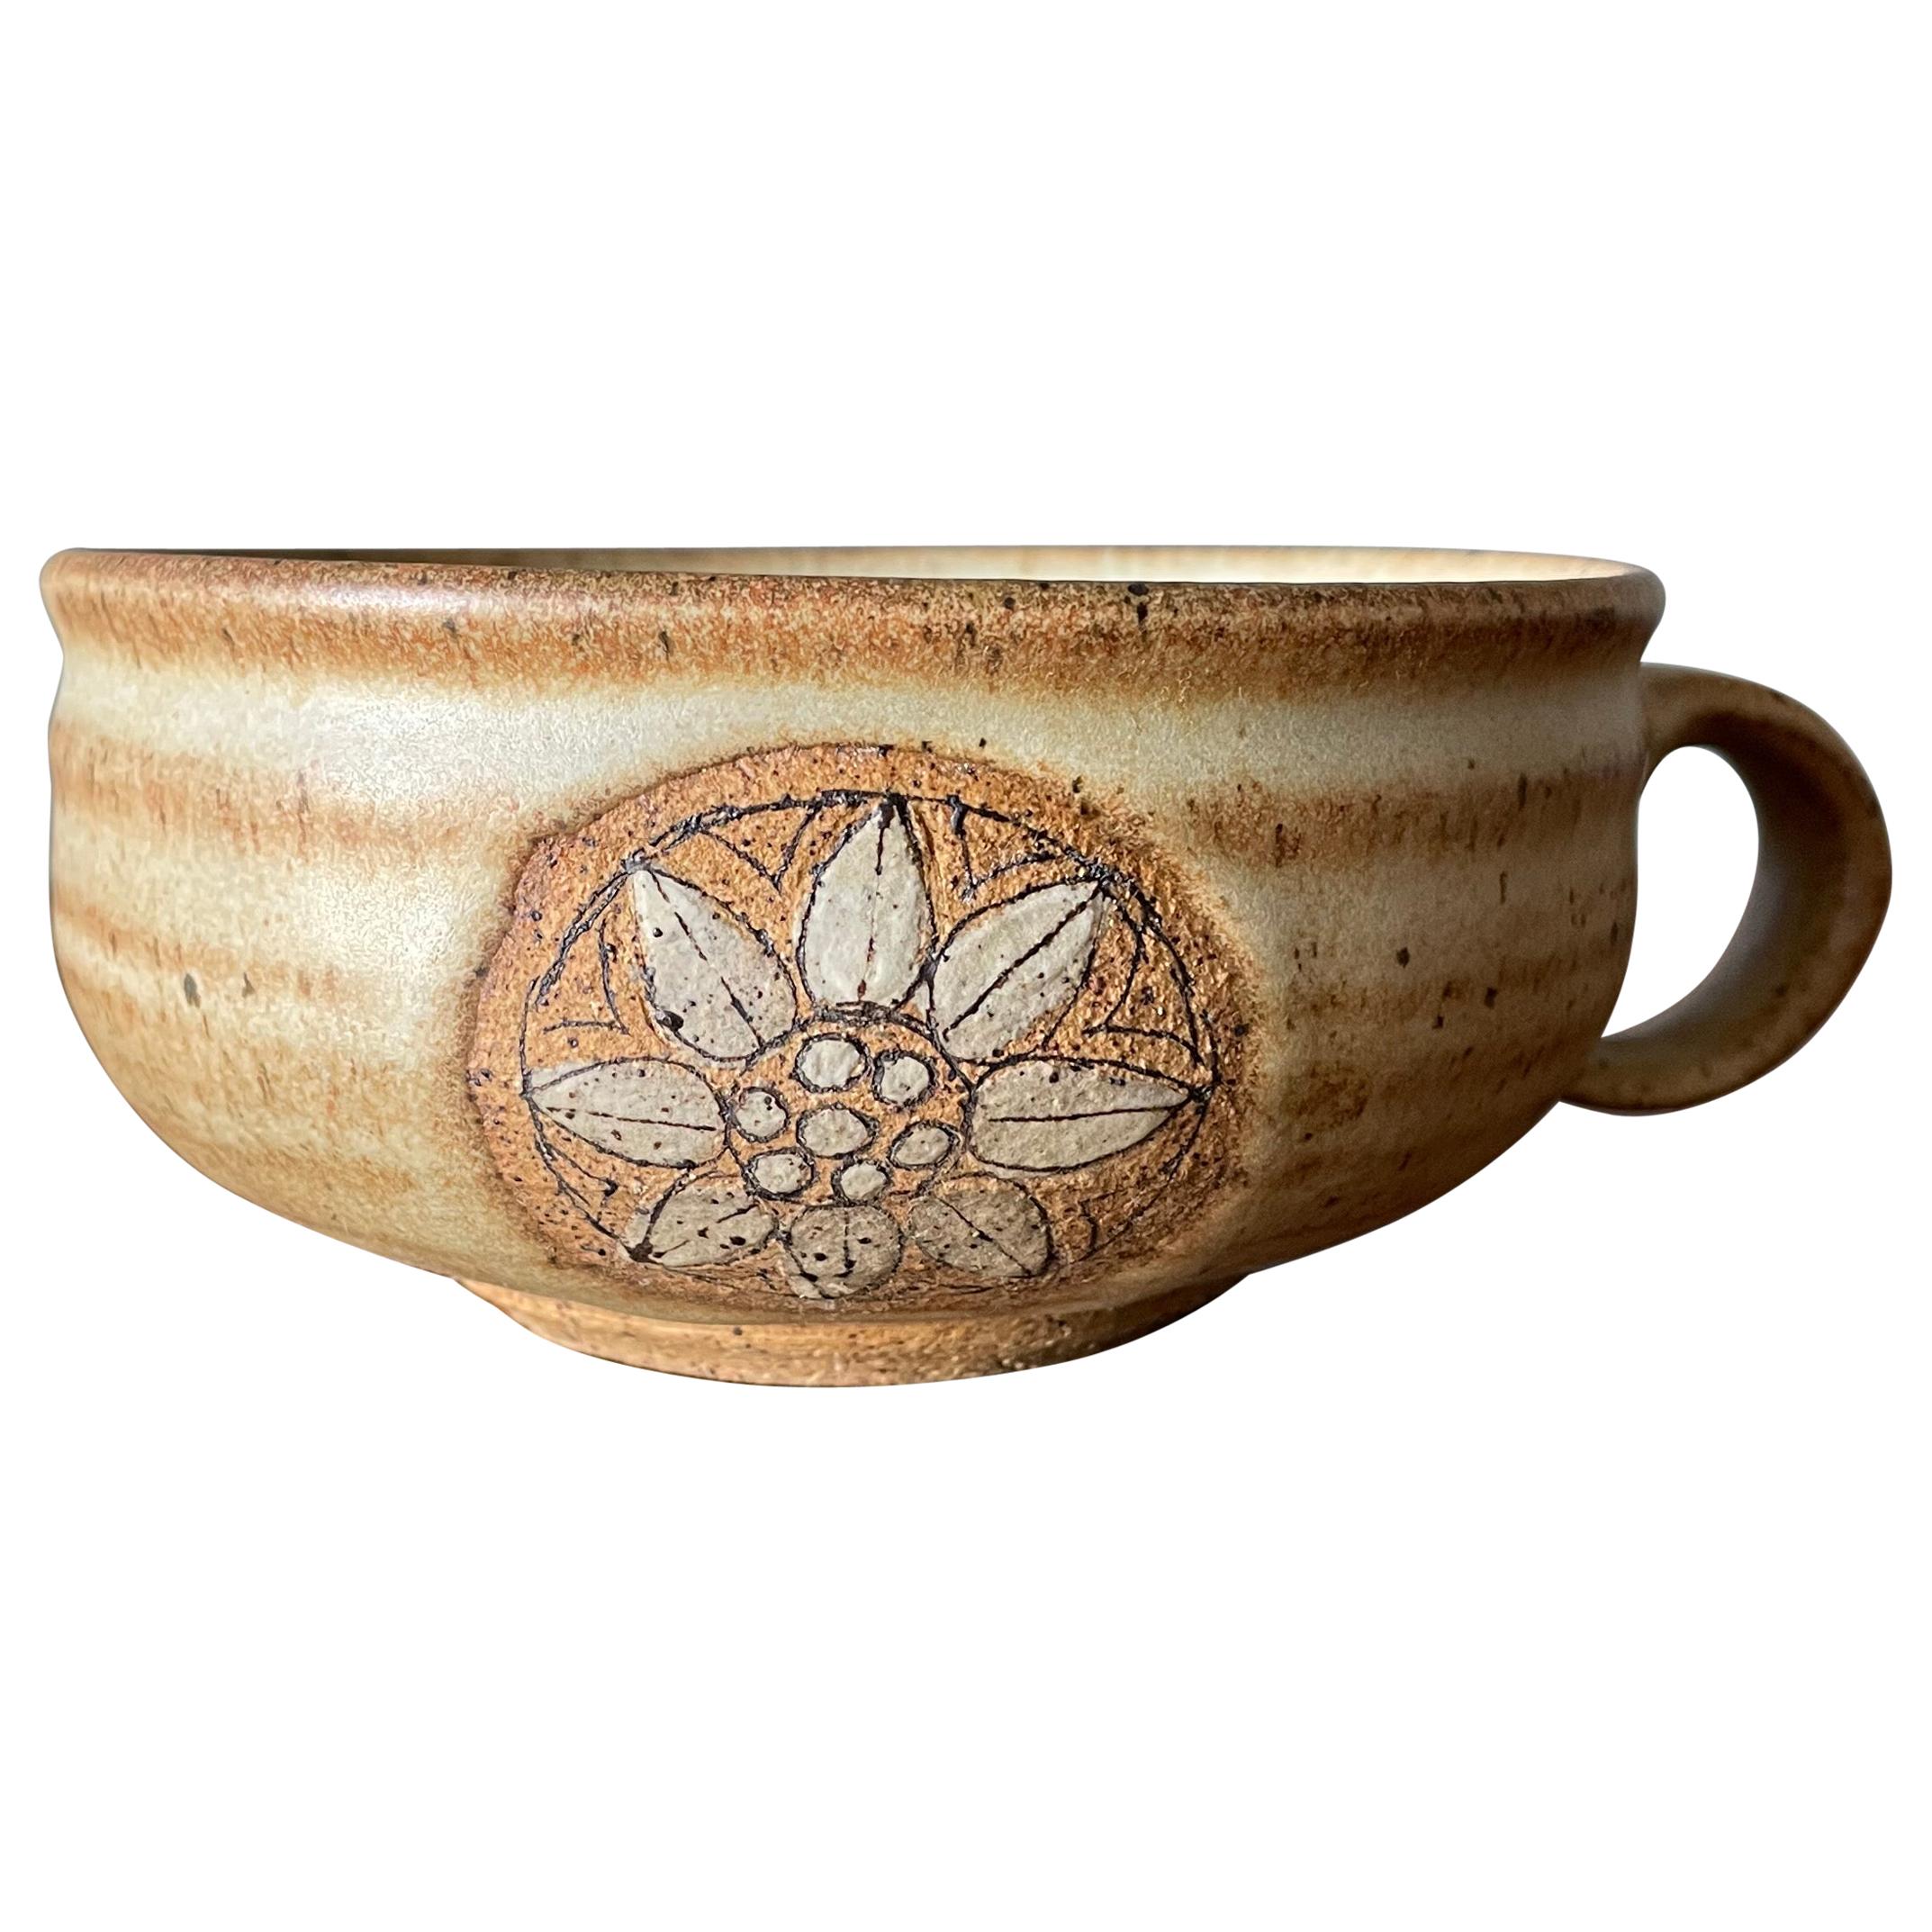 Handmade ceramic wheel thrown Peace Bowl Crafted in 2001.